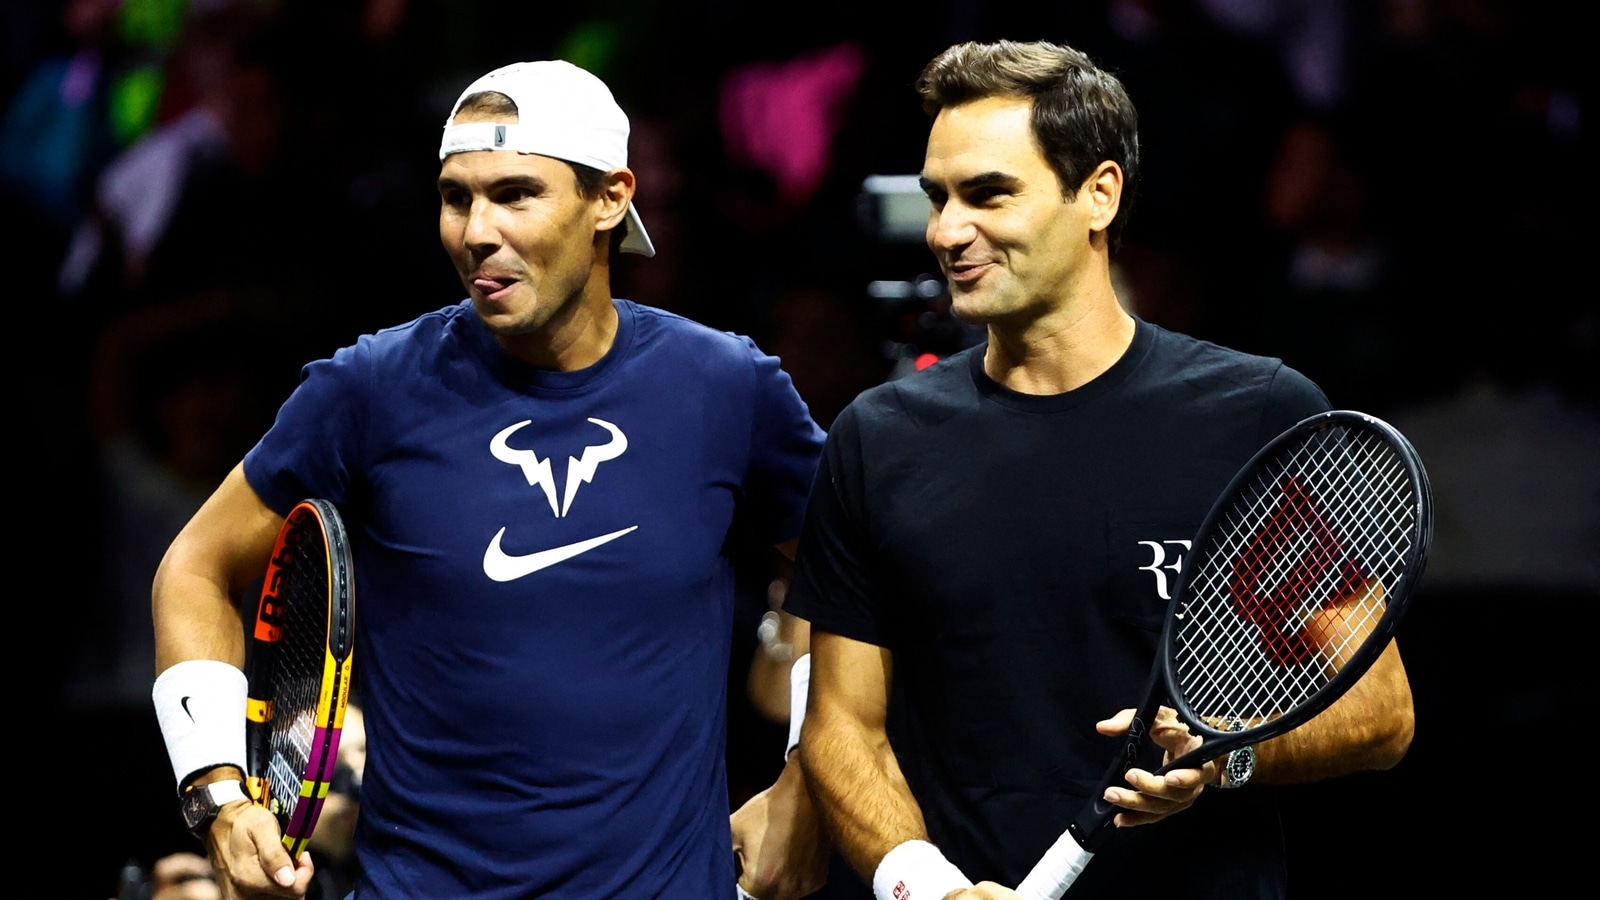 watch-rafael-nadal-s-priceless-reaction-on-teaming-up-with-roger-federer-in-tennis-icon-s-final-match-at-laver-cup